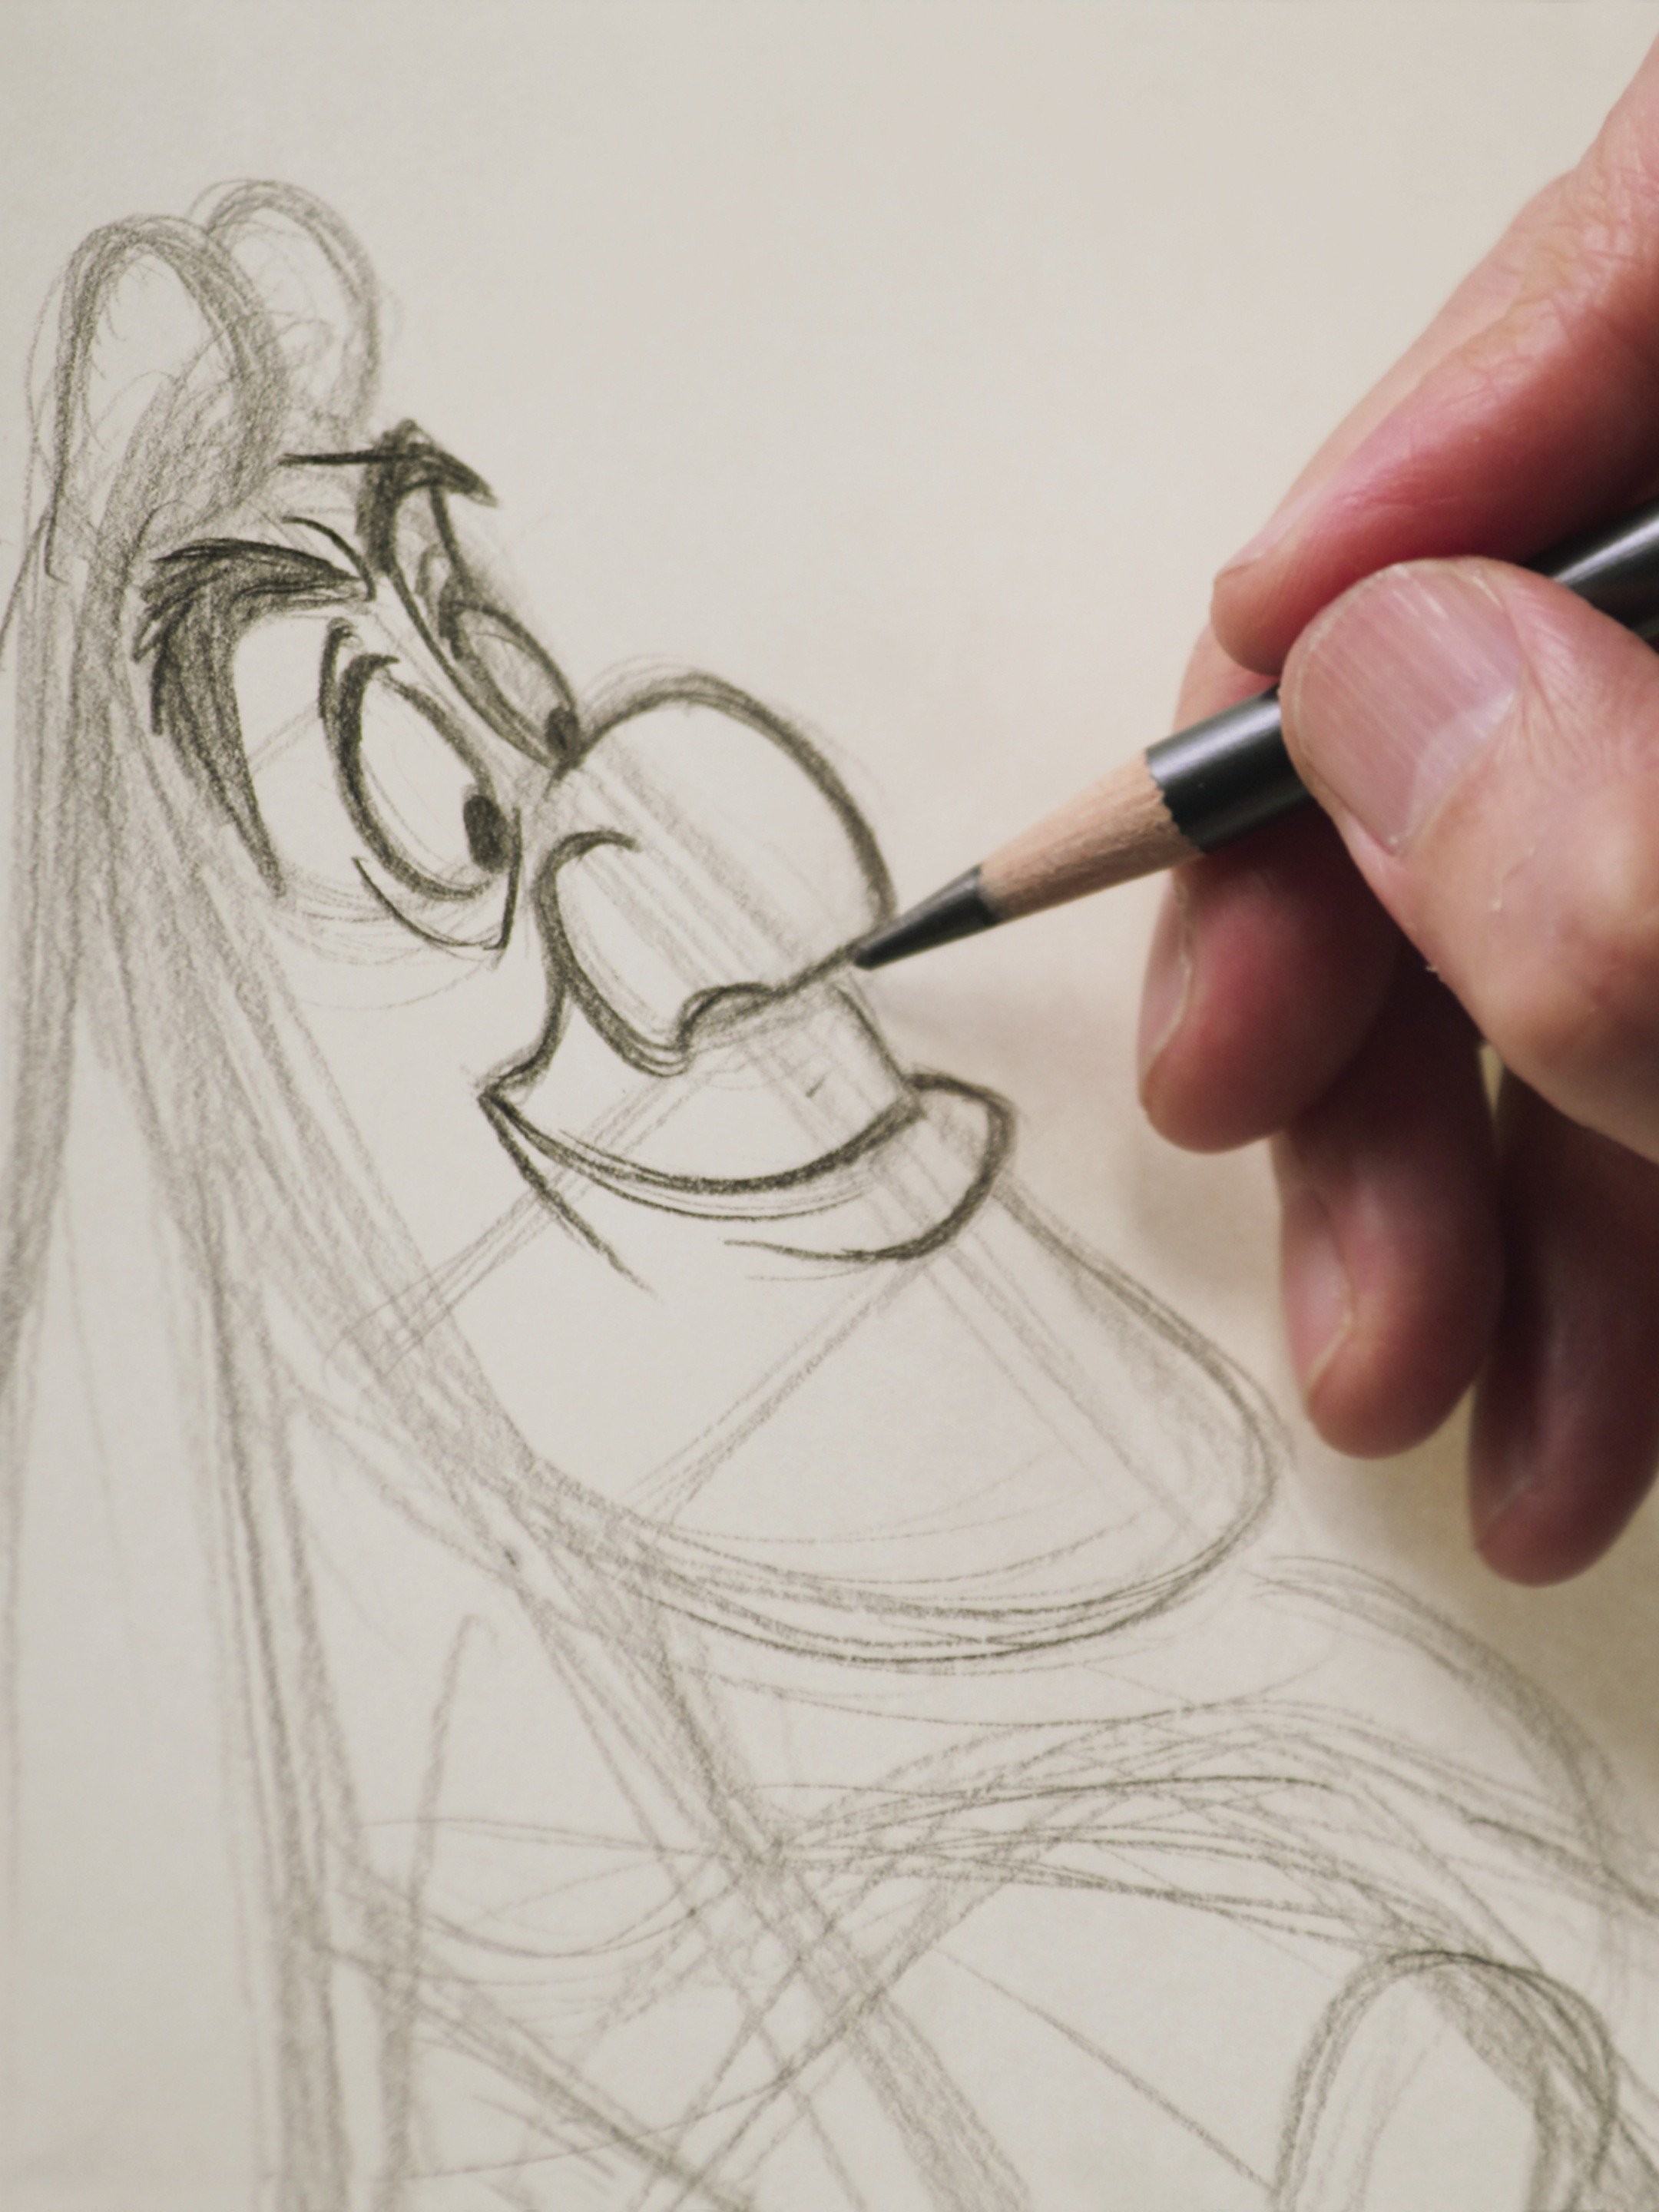 New Disney+ Series Sketchbook Teaches You How to Draw